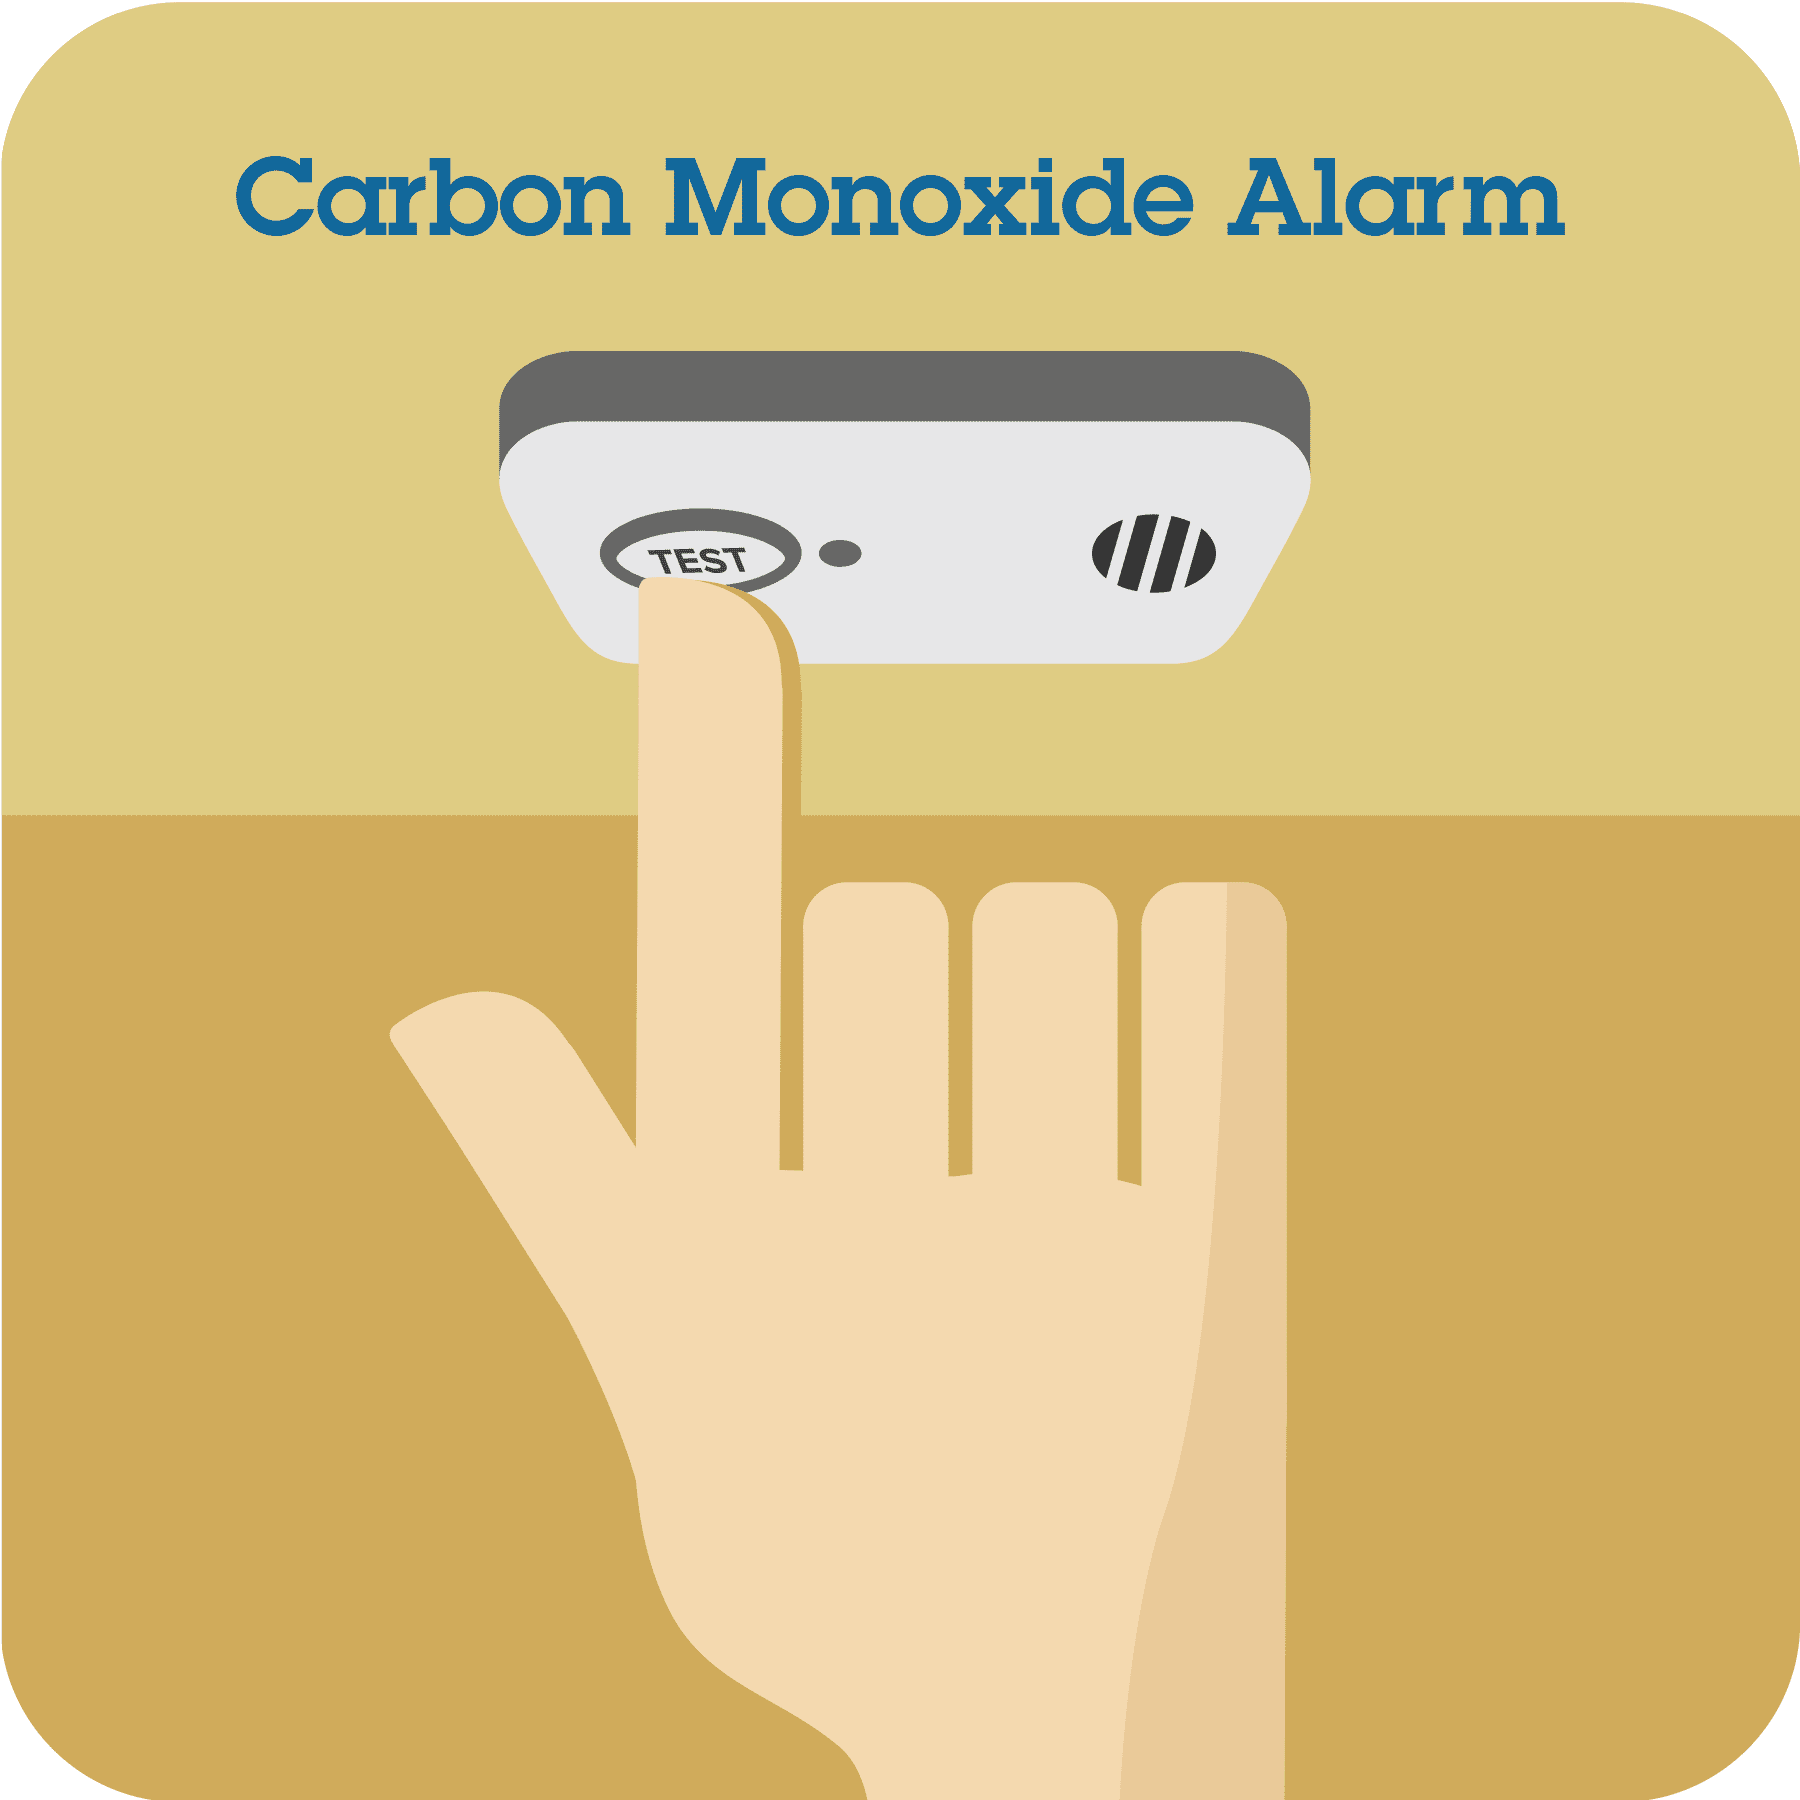 Hand pushing the test button on carbon monoxide alarm.